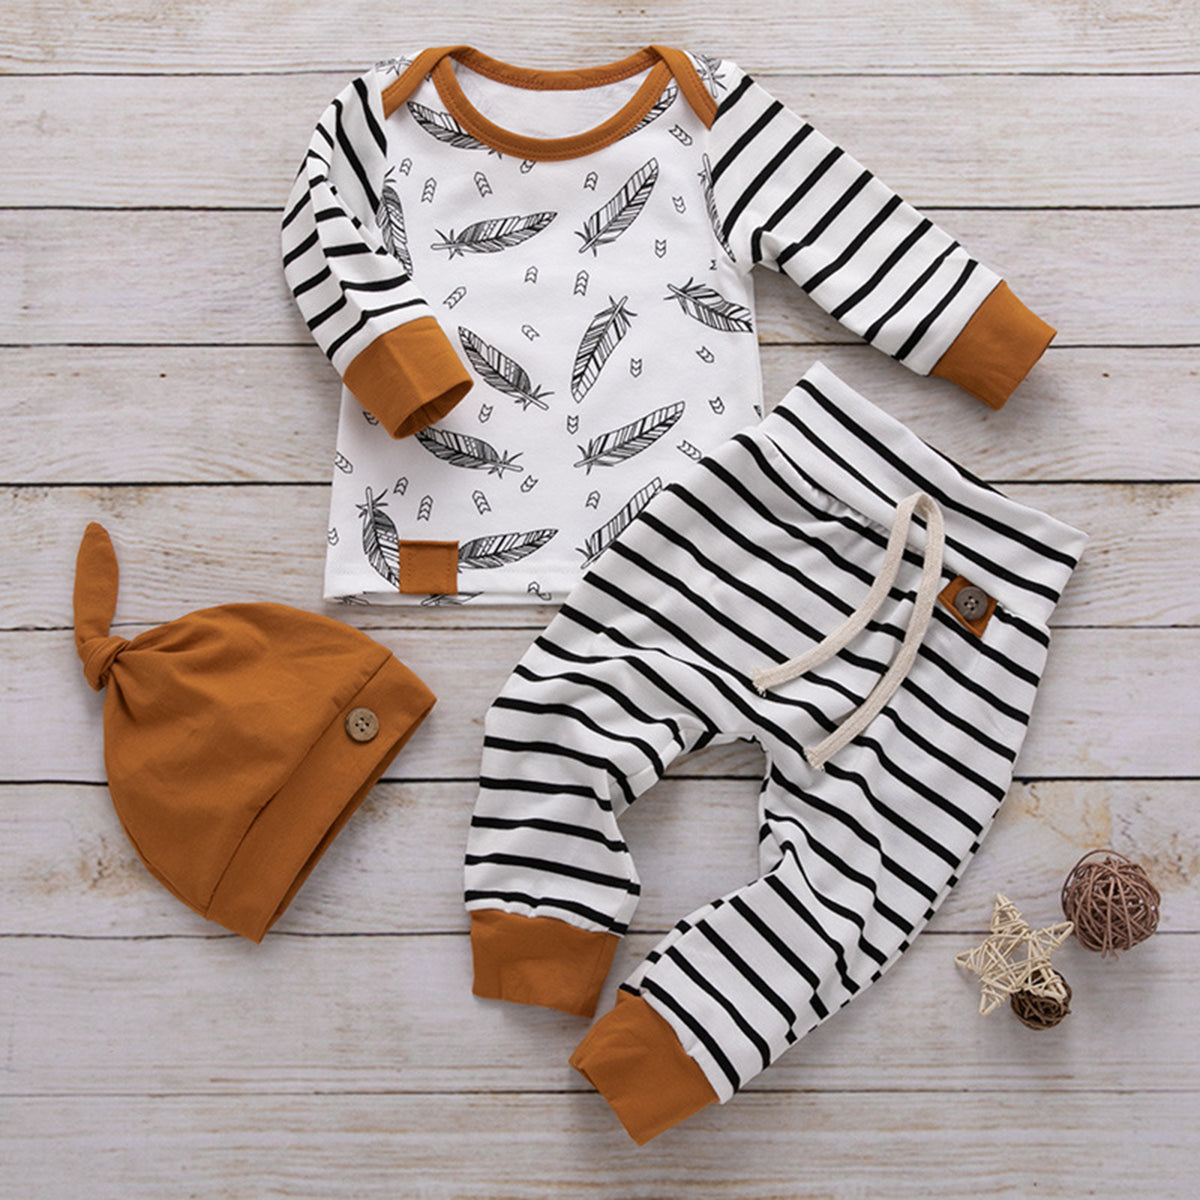 Striped Printed Long Sleeve Top and Tied Pants Set: Casual Chic